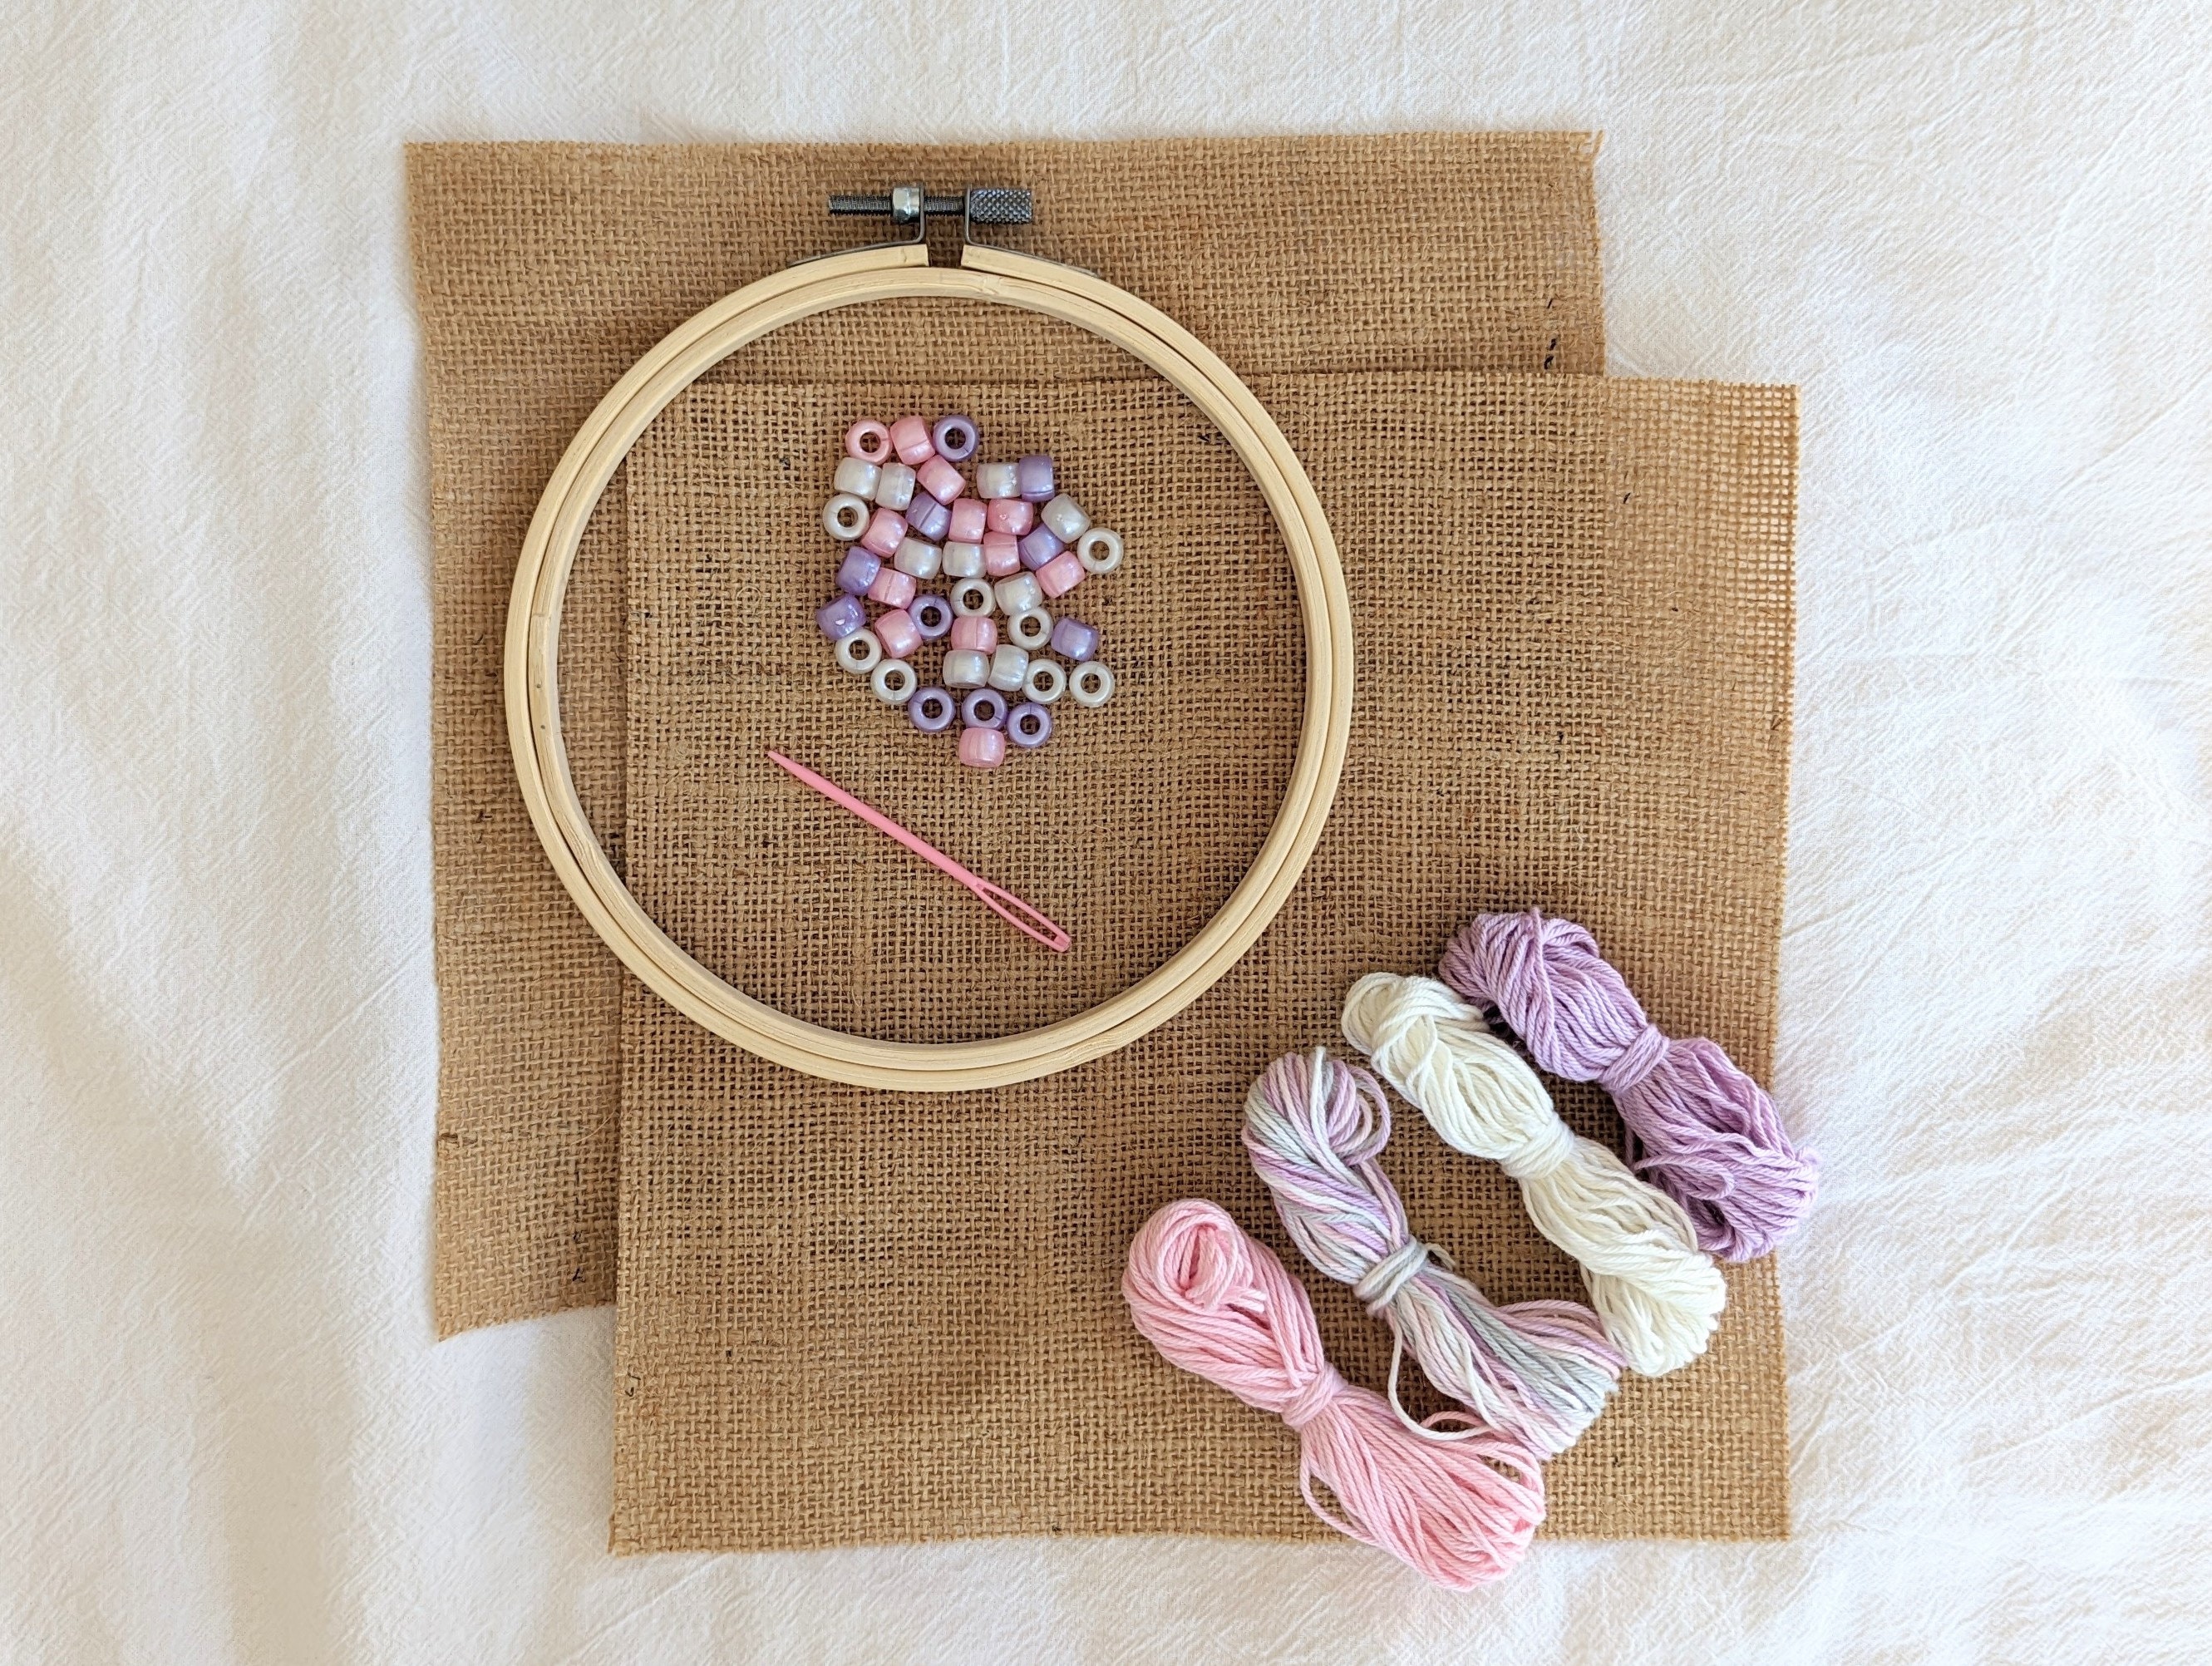 Funny Embroidery Kit, Beginner Embroidery Kit, DIY Craft Kit, Flowers  Embroidery Full Kit With Pattern and Hoop, Gift for Her, Mothers Day 